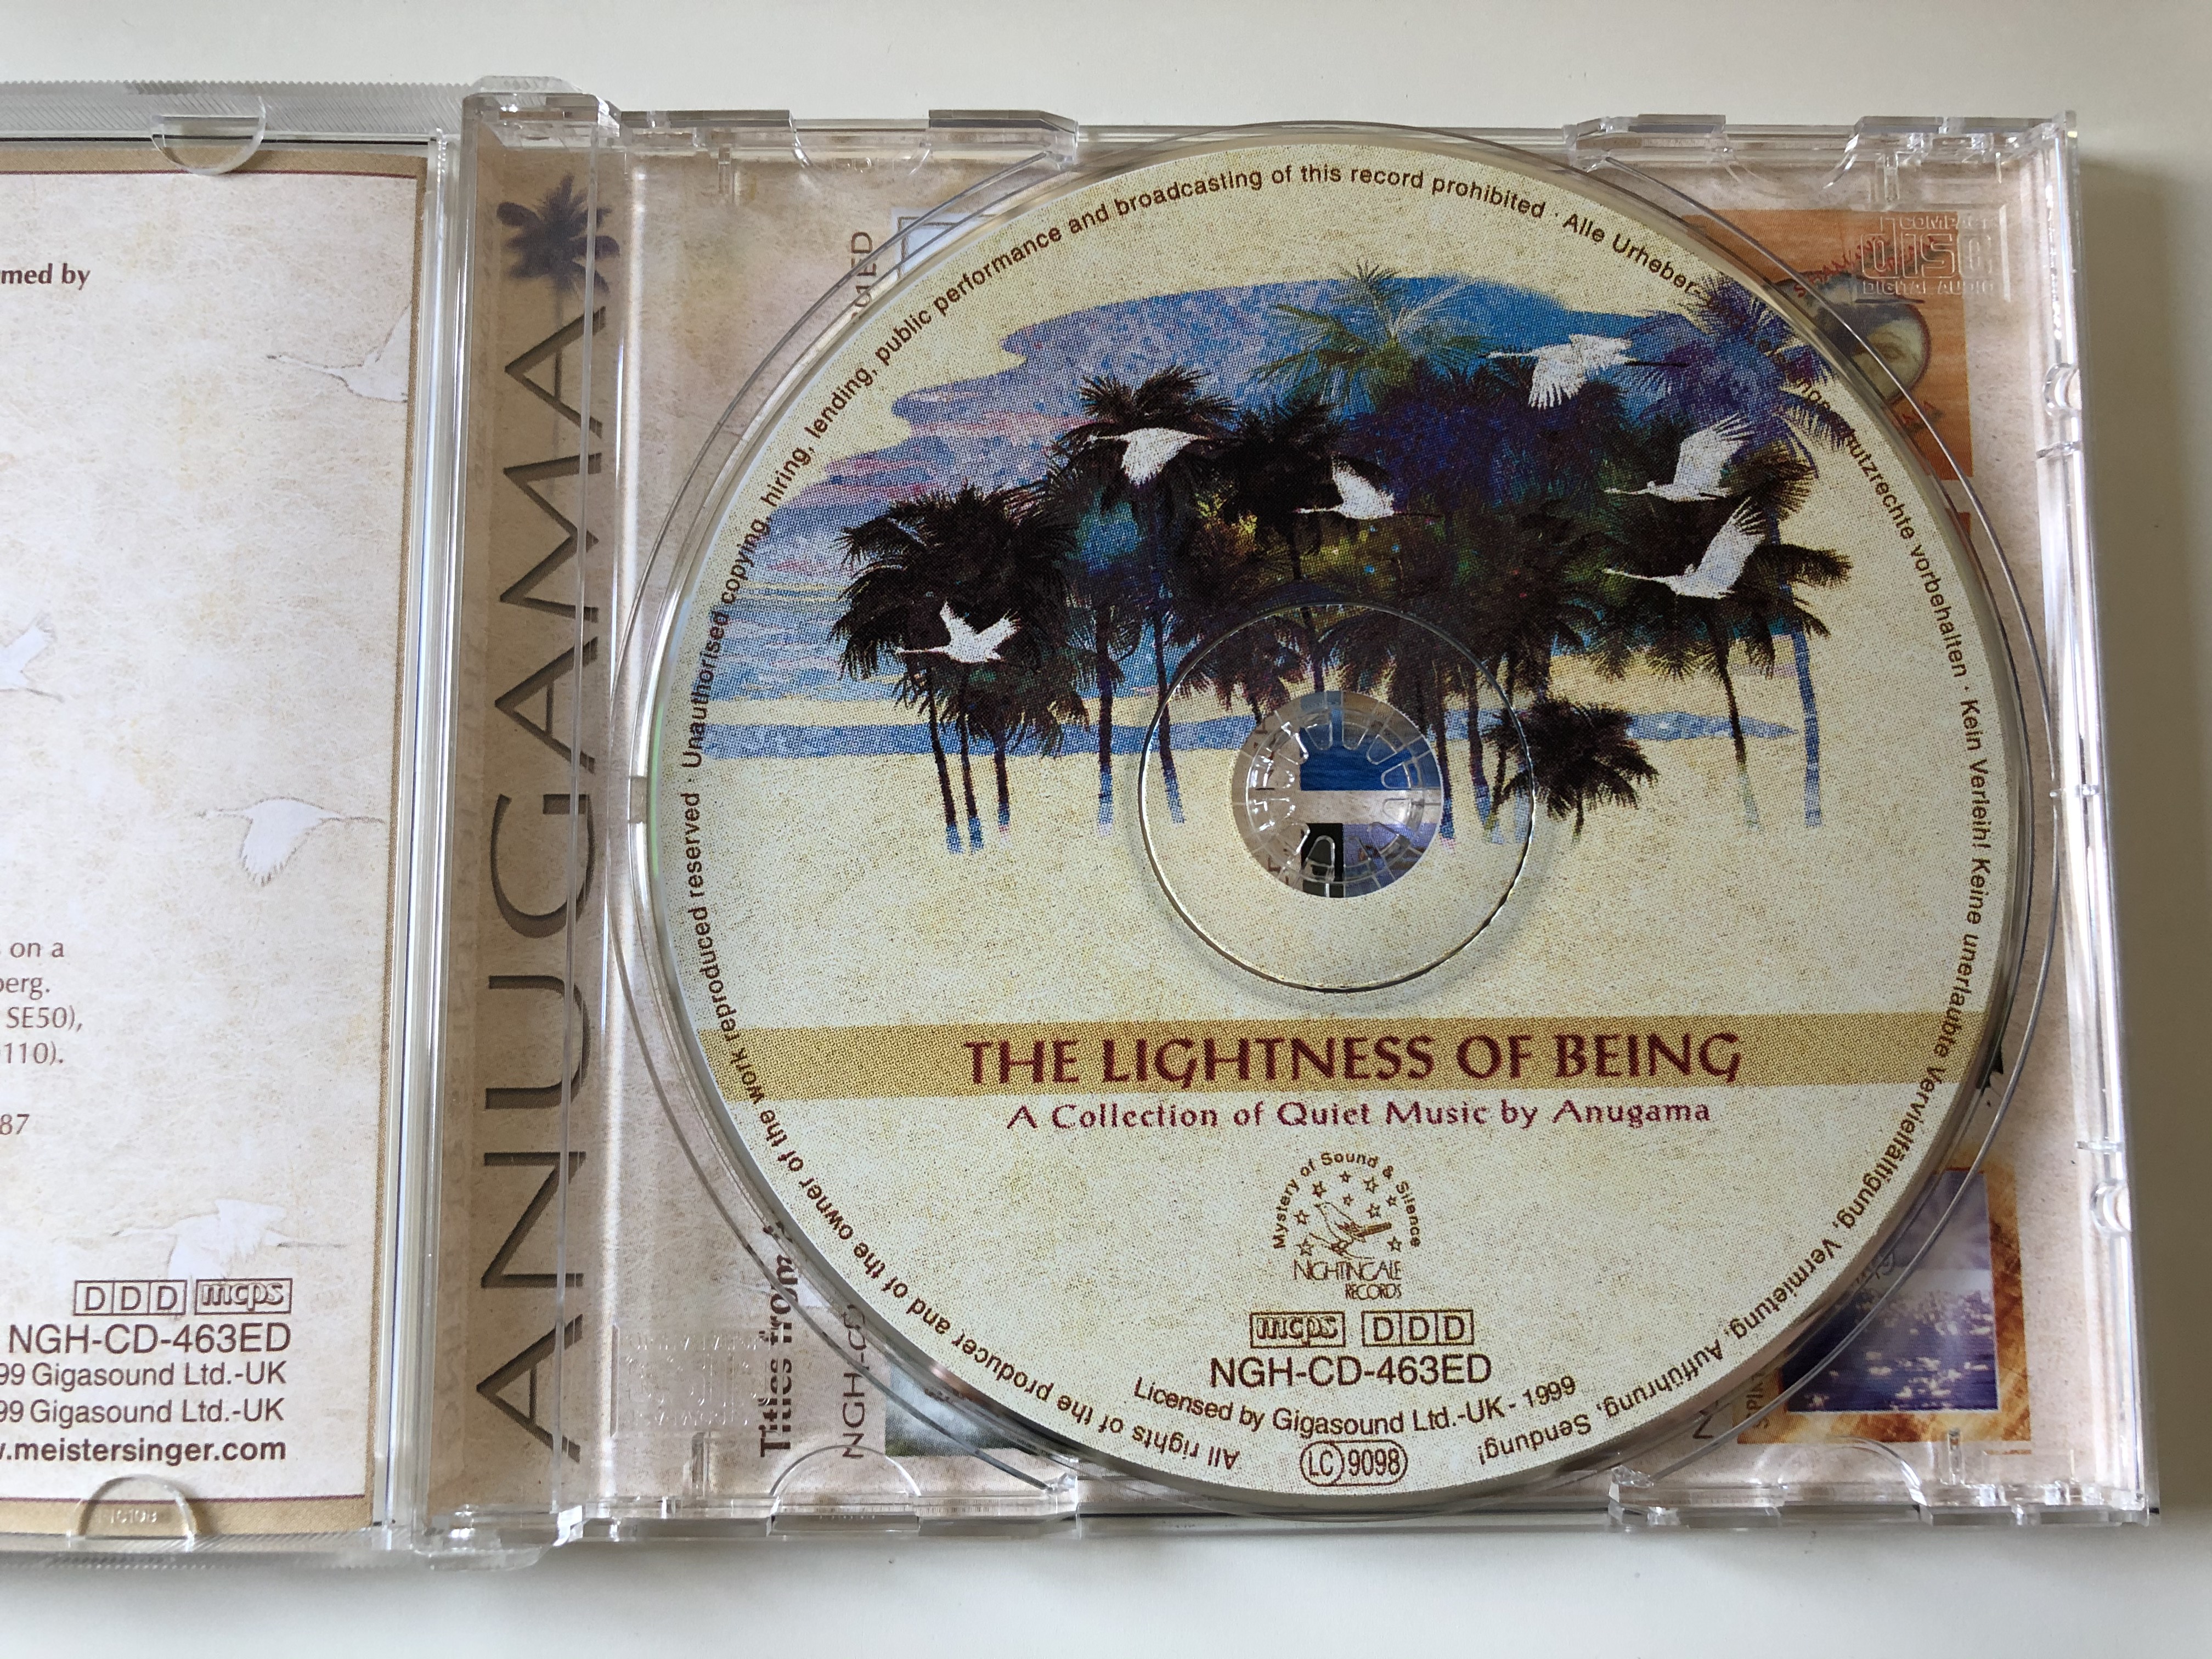 the-lightness-of-being-anugama-a-collection-of-quiet-music-by-anugama-nightingale-records-audio-cd-1999-ngh-cd-463-2ed-4-.jpg